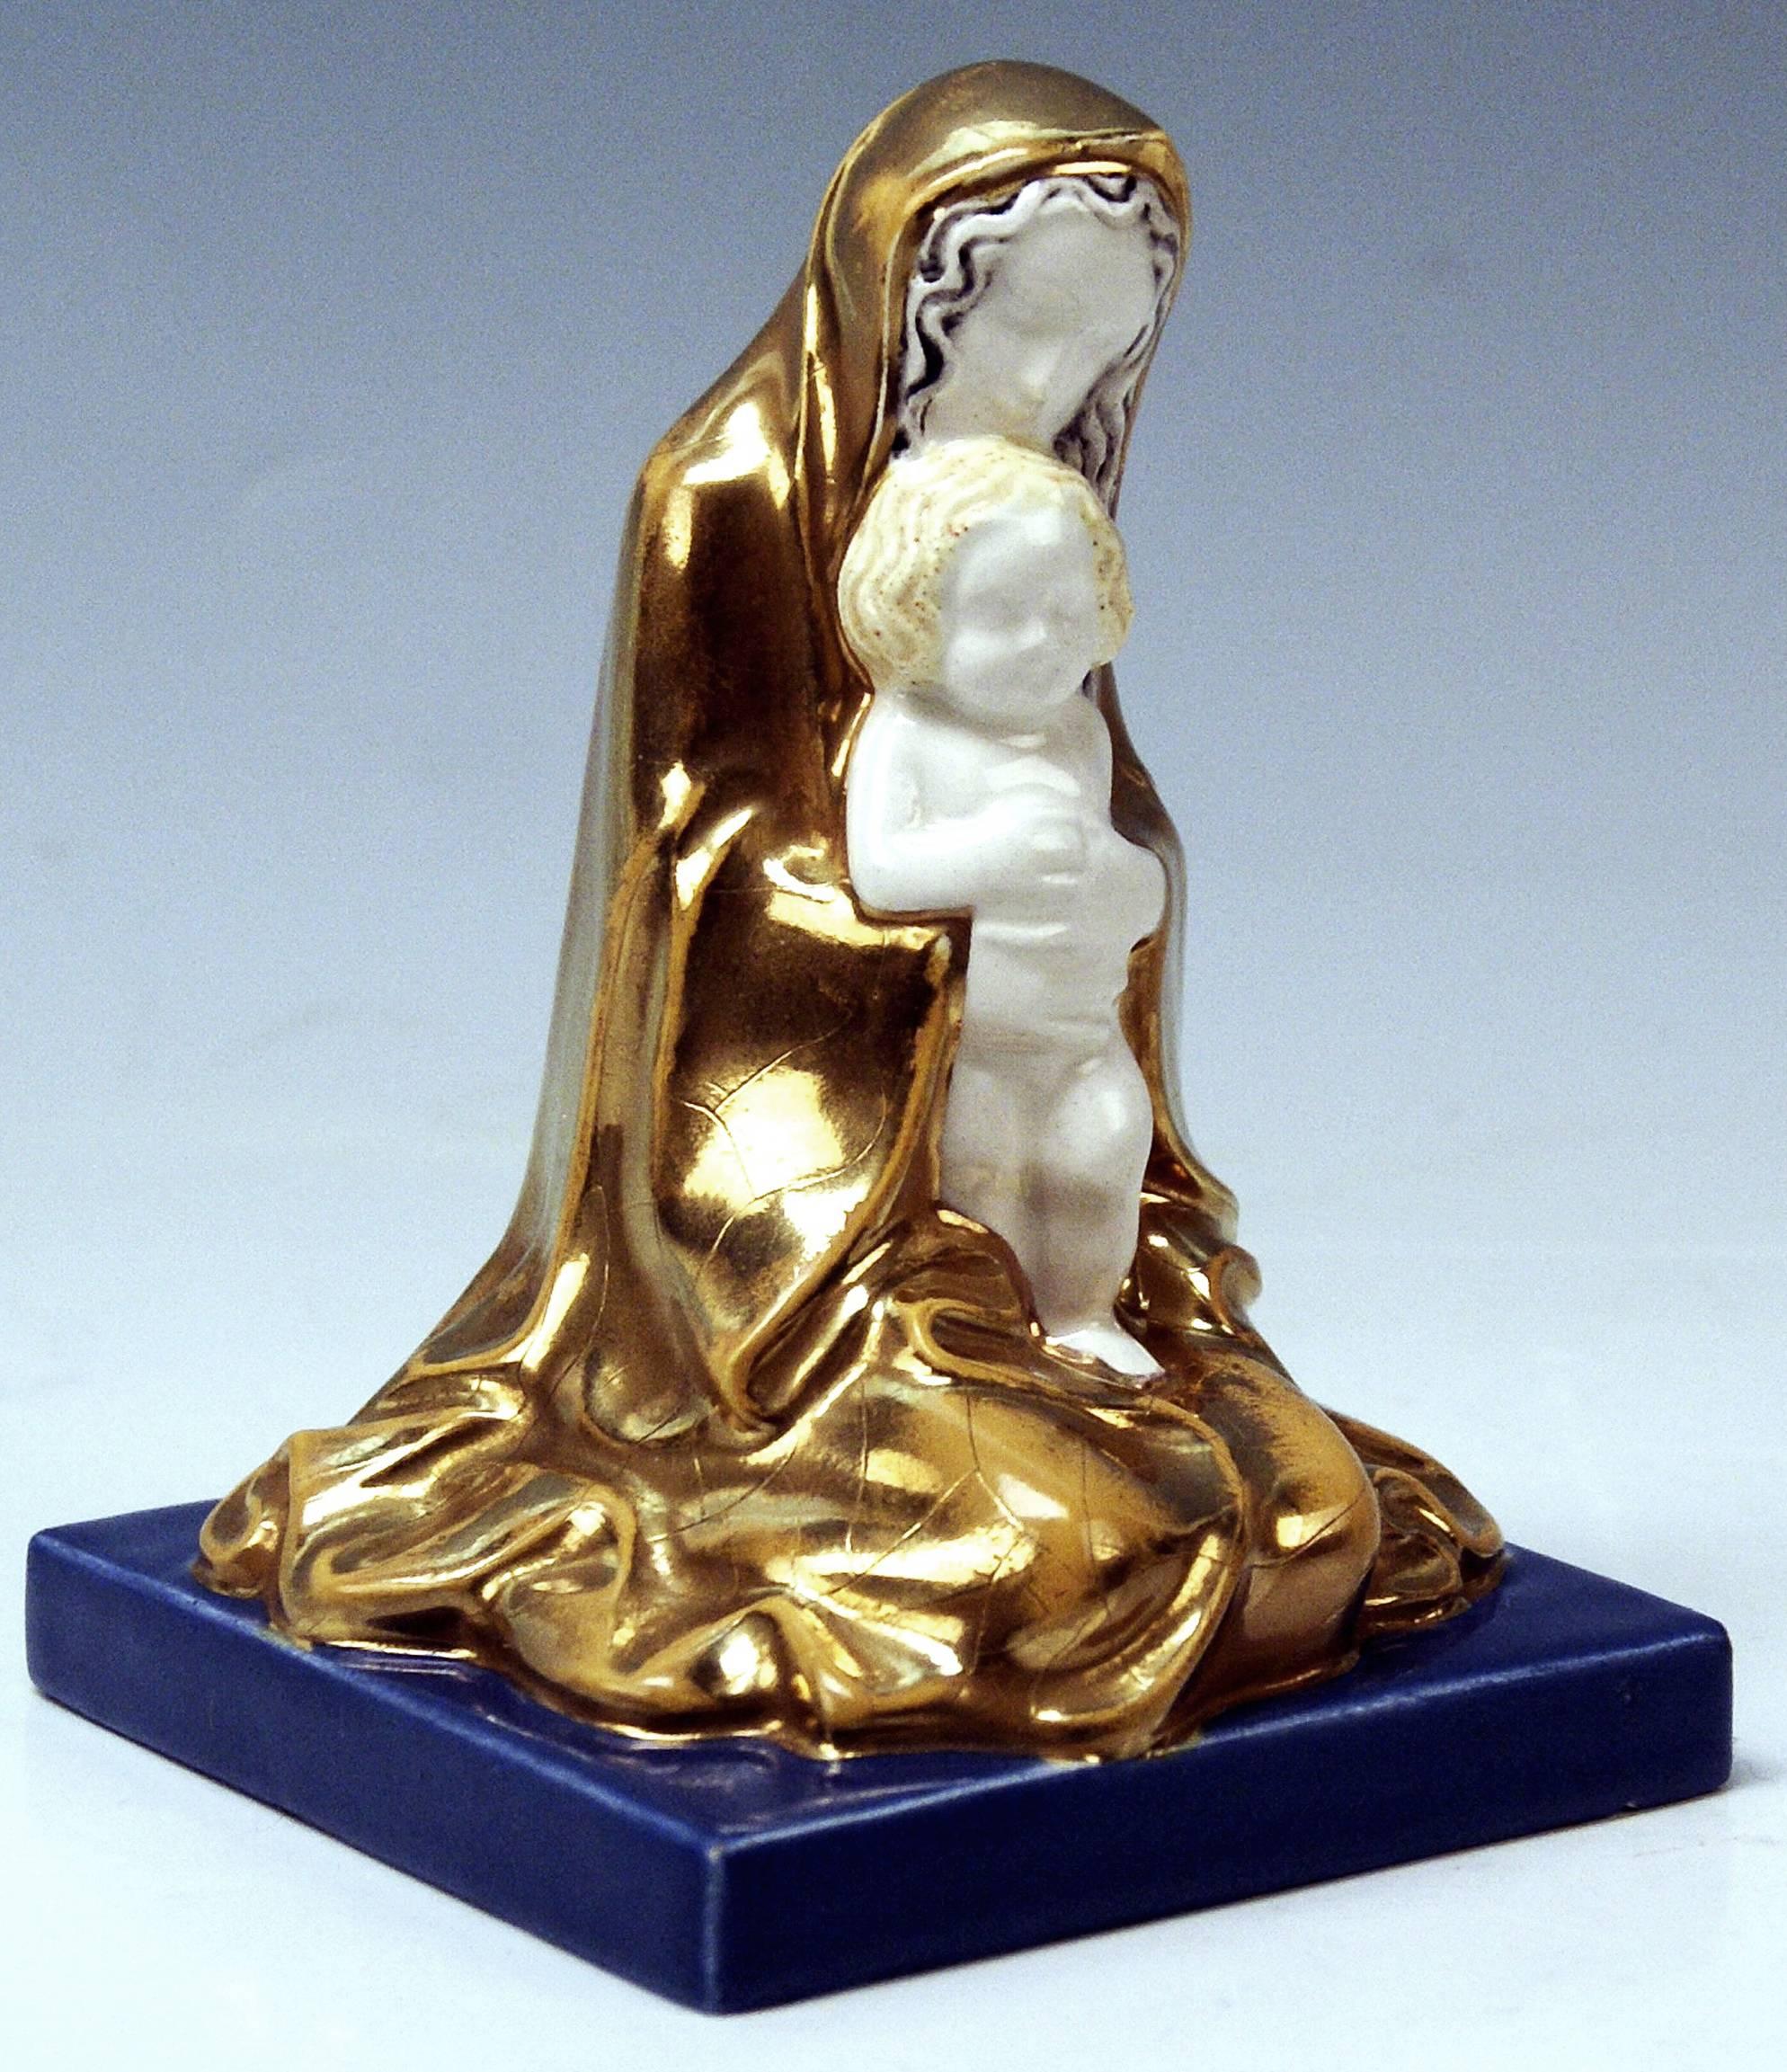 Michael Powolny Art Nouveau sculpture:
Virgin Mary with Jesus child, it is a most lovely ceramics item, indeed!
Modelled by Michael Powolny (1871-1954,) circa 1907.

Hallmarked:
Manufactured by Wiener Keramik (Vienna Ceramics) (WK /